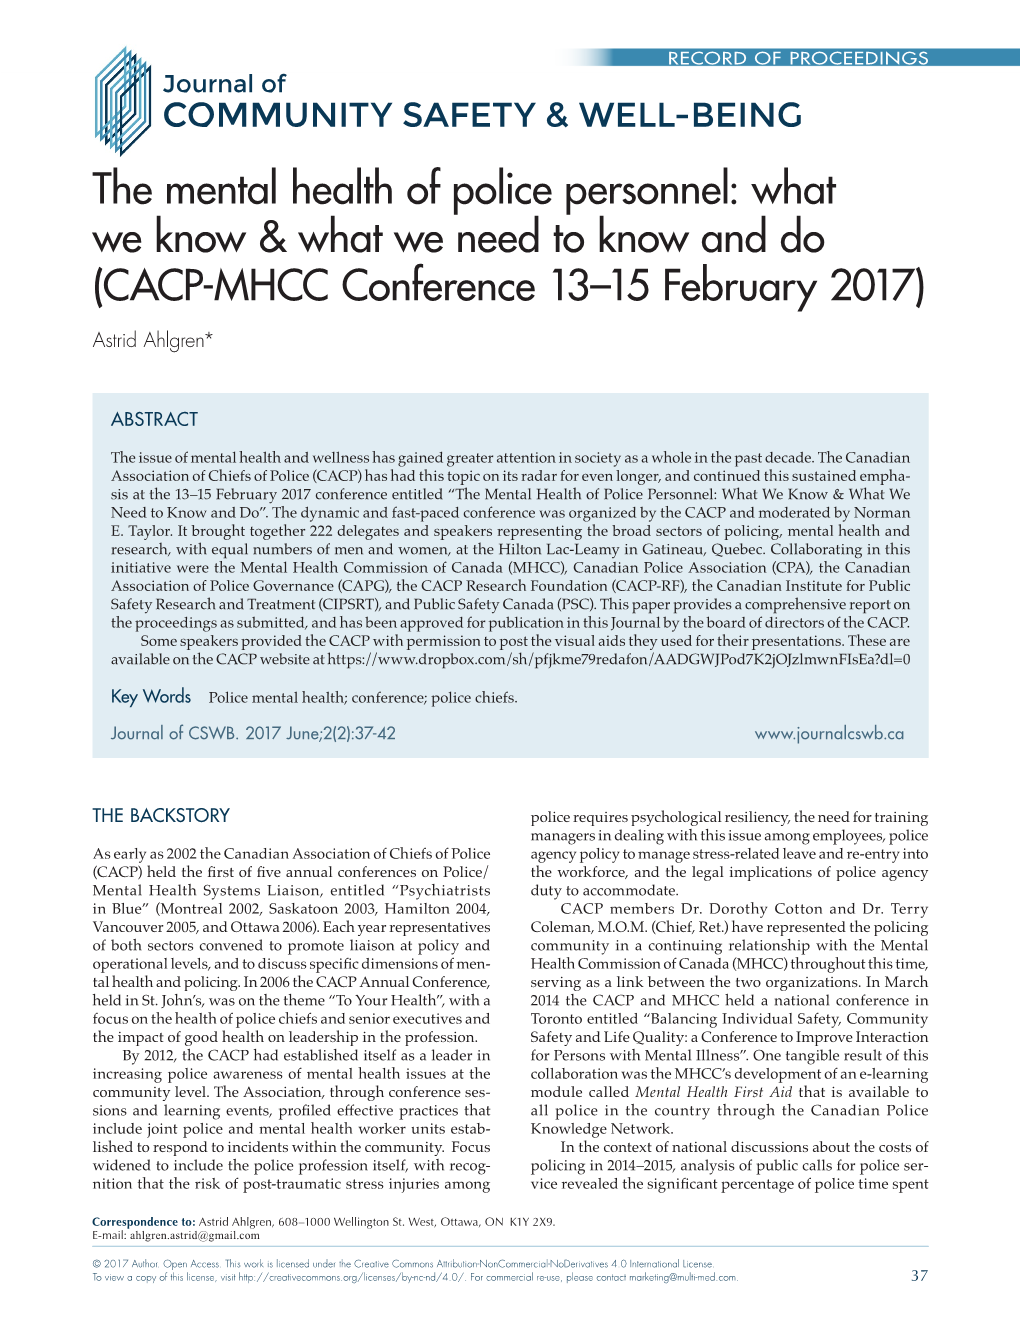 The Mental Health of Police Personnel: What We Know & What We Need to Know and Do (CACP-MHCC Conference 13–15 February 2017)